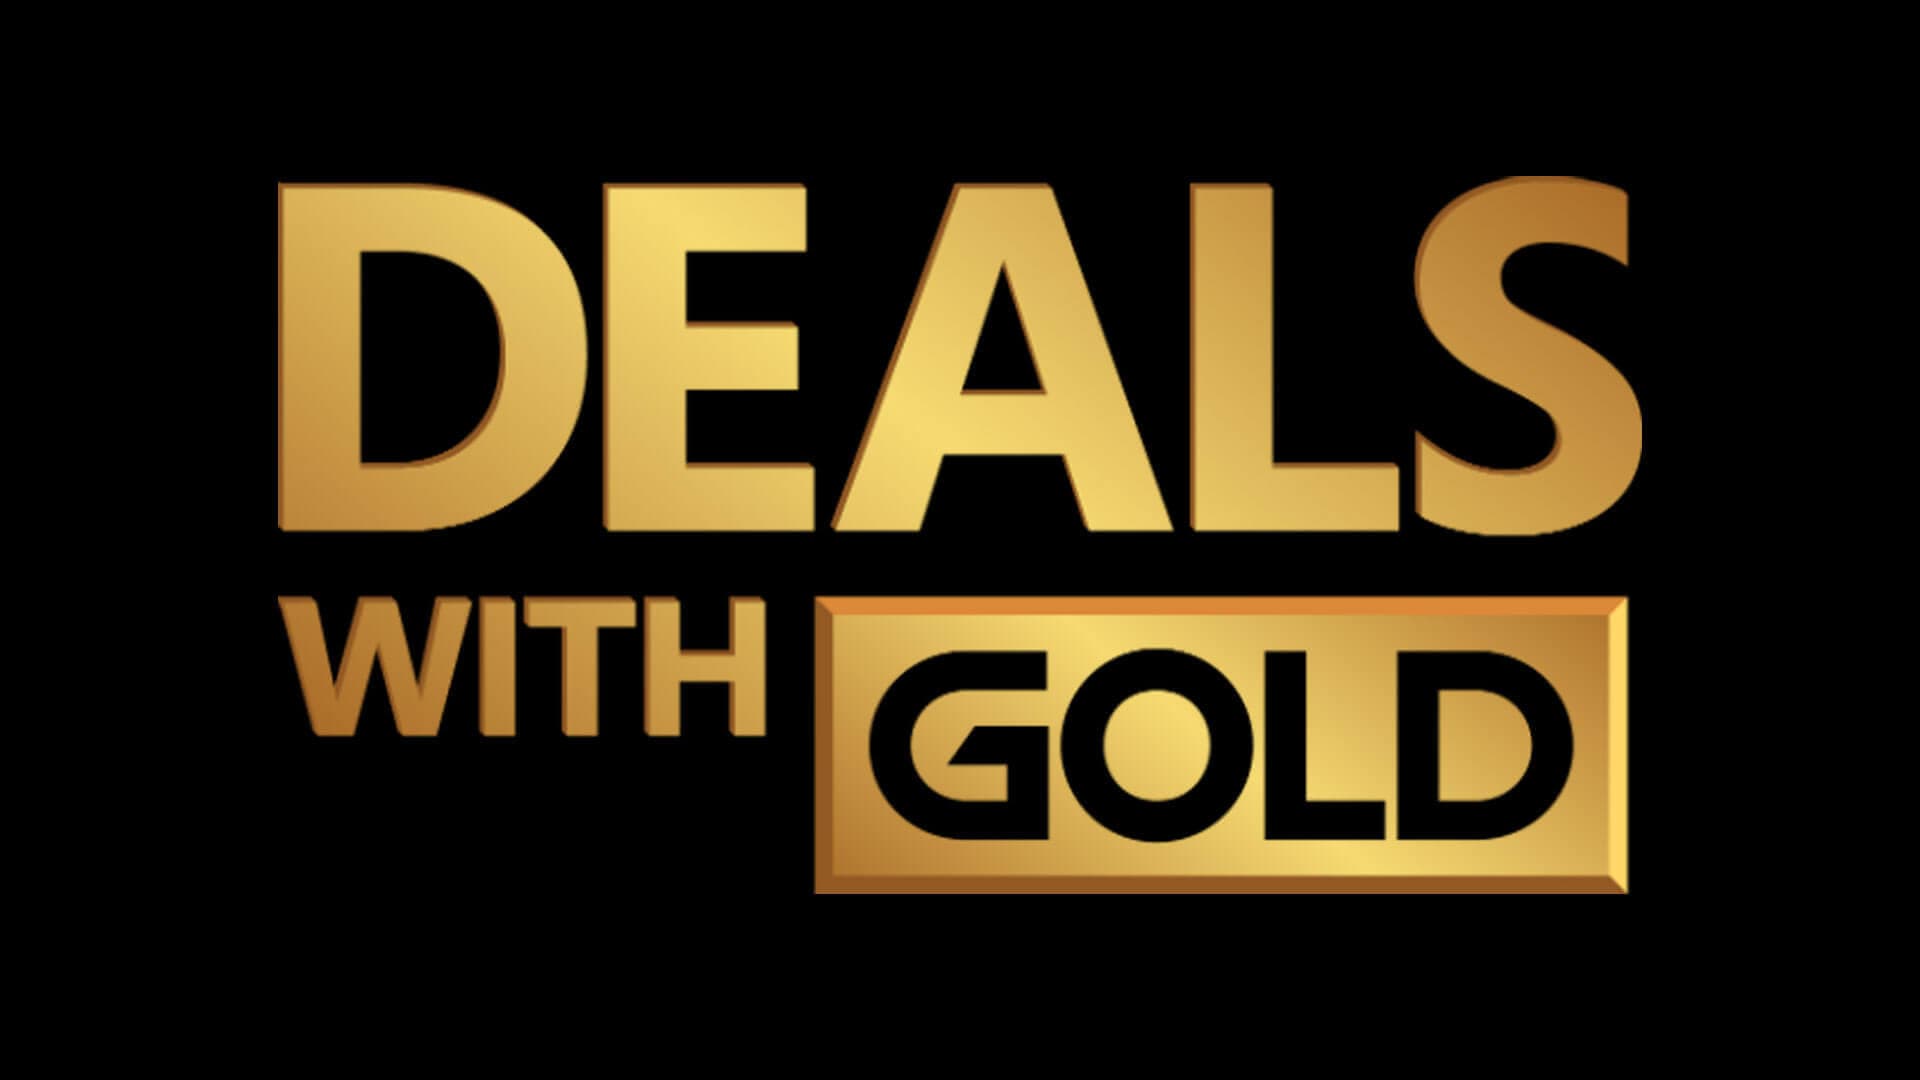 Deals with Gold semaine 01